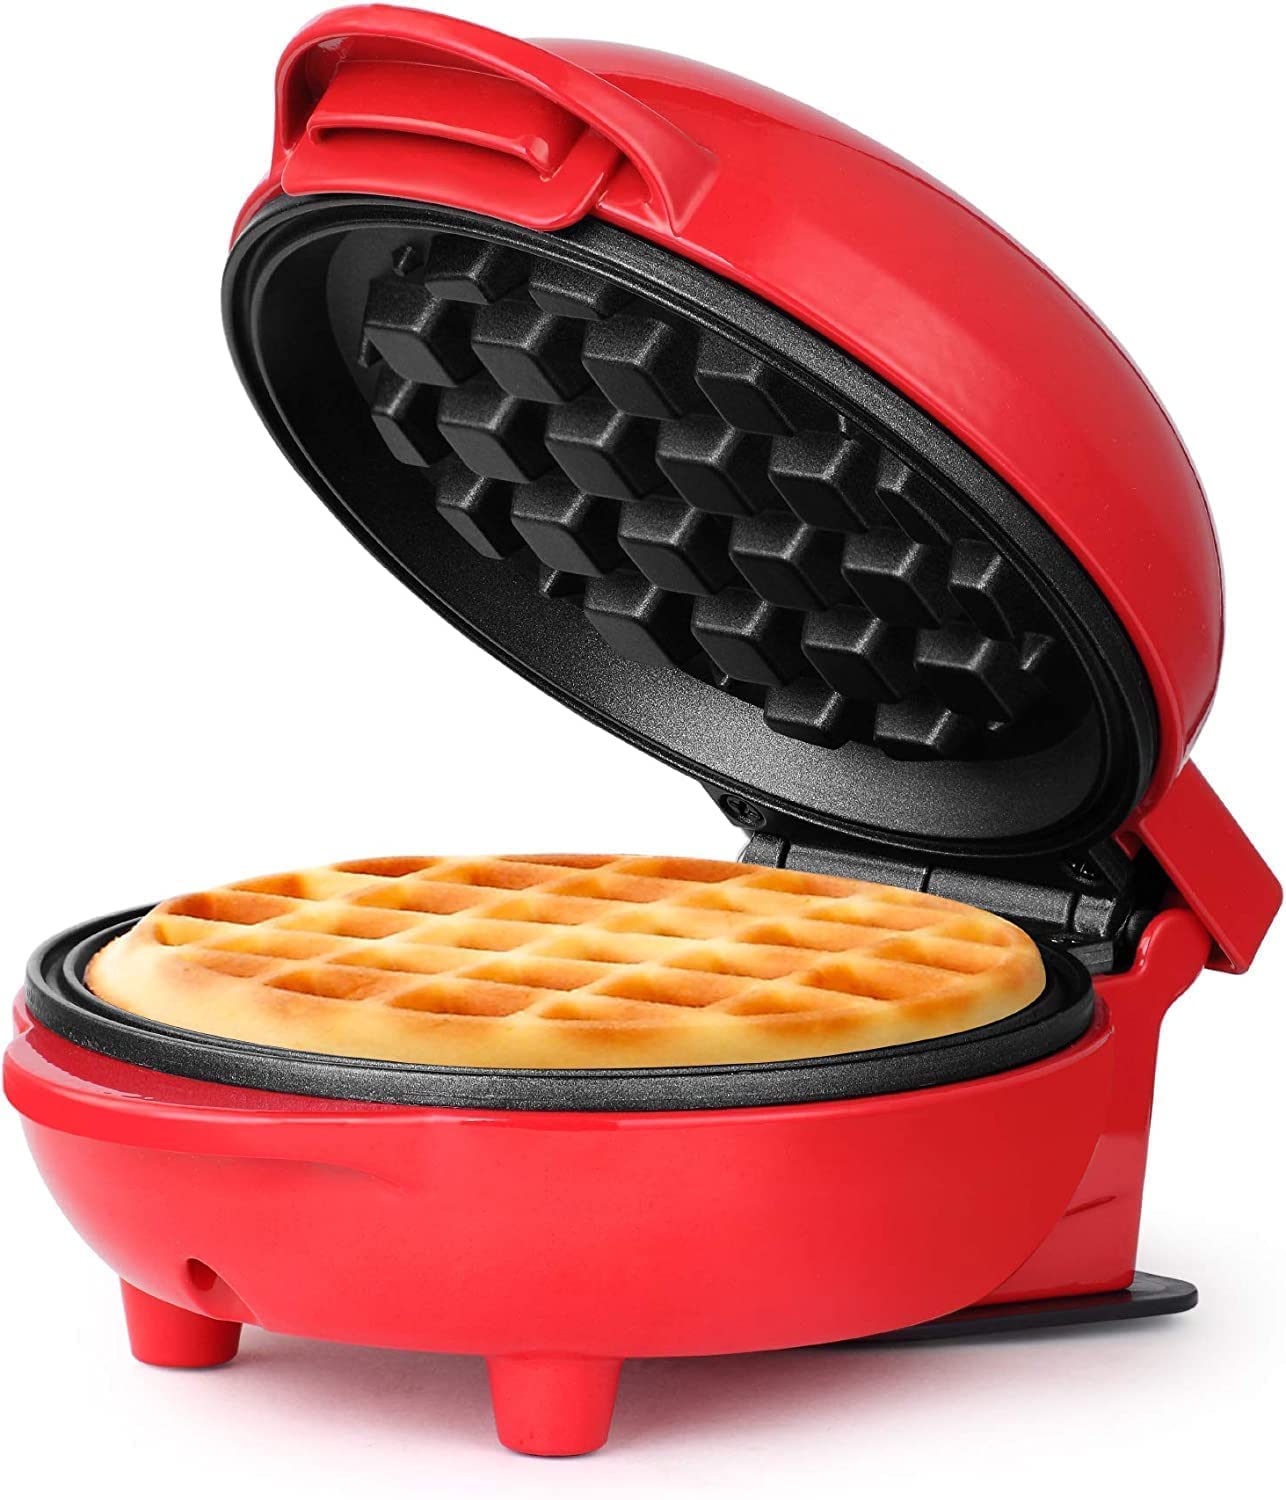 Create Delicious and Fun Mini Waffles with Our Compact 4-Inch Waffle Maker!